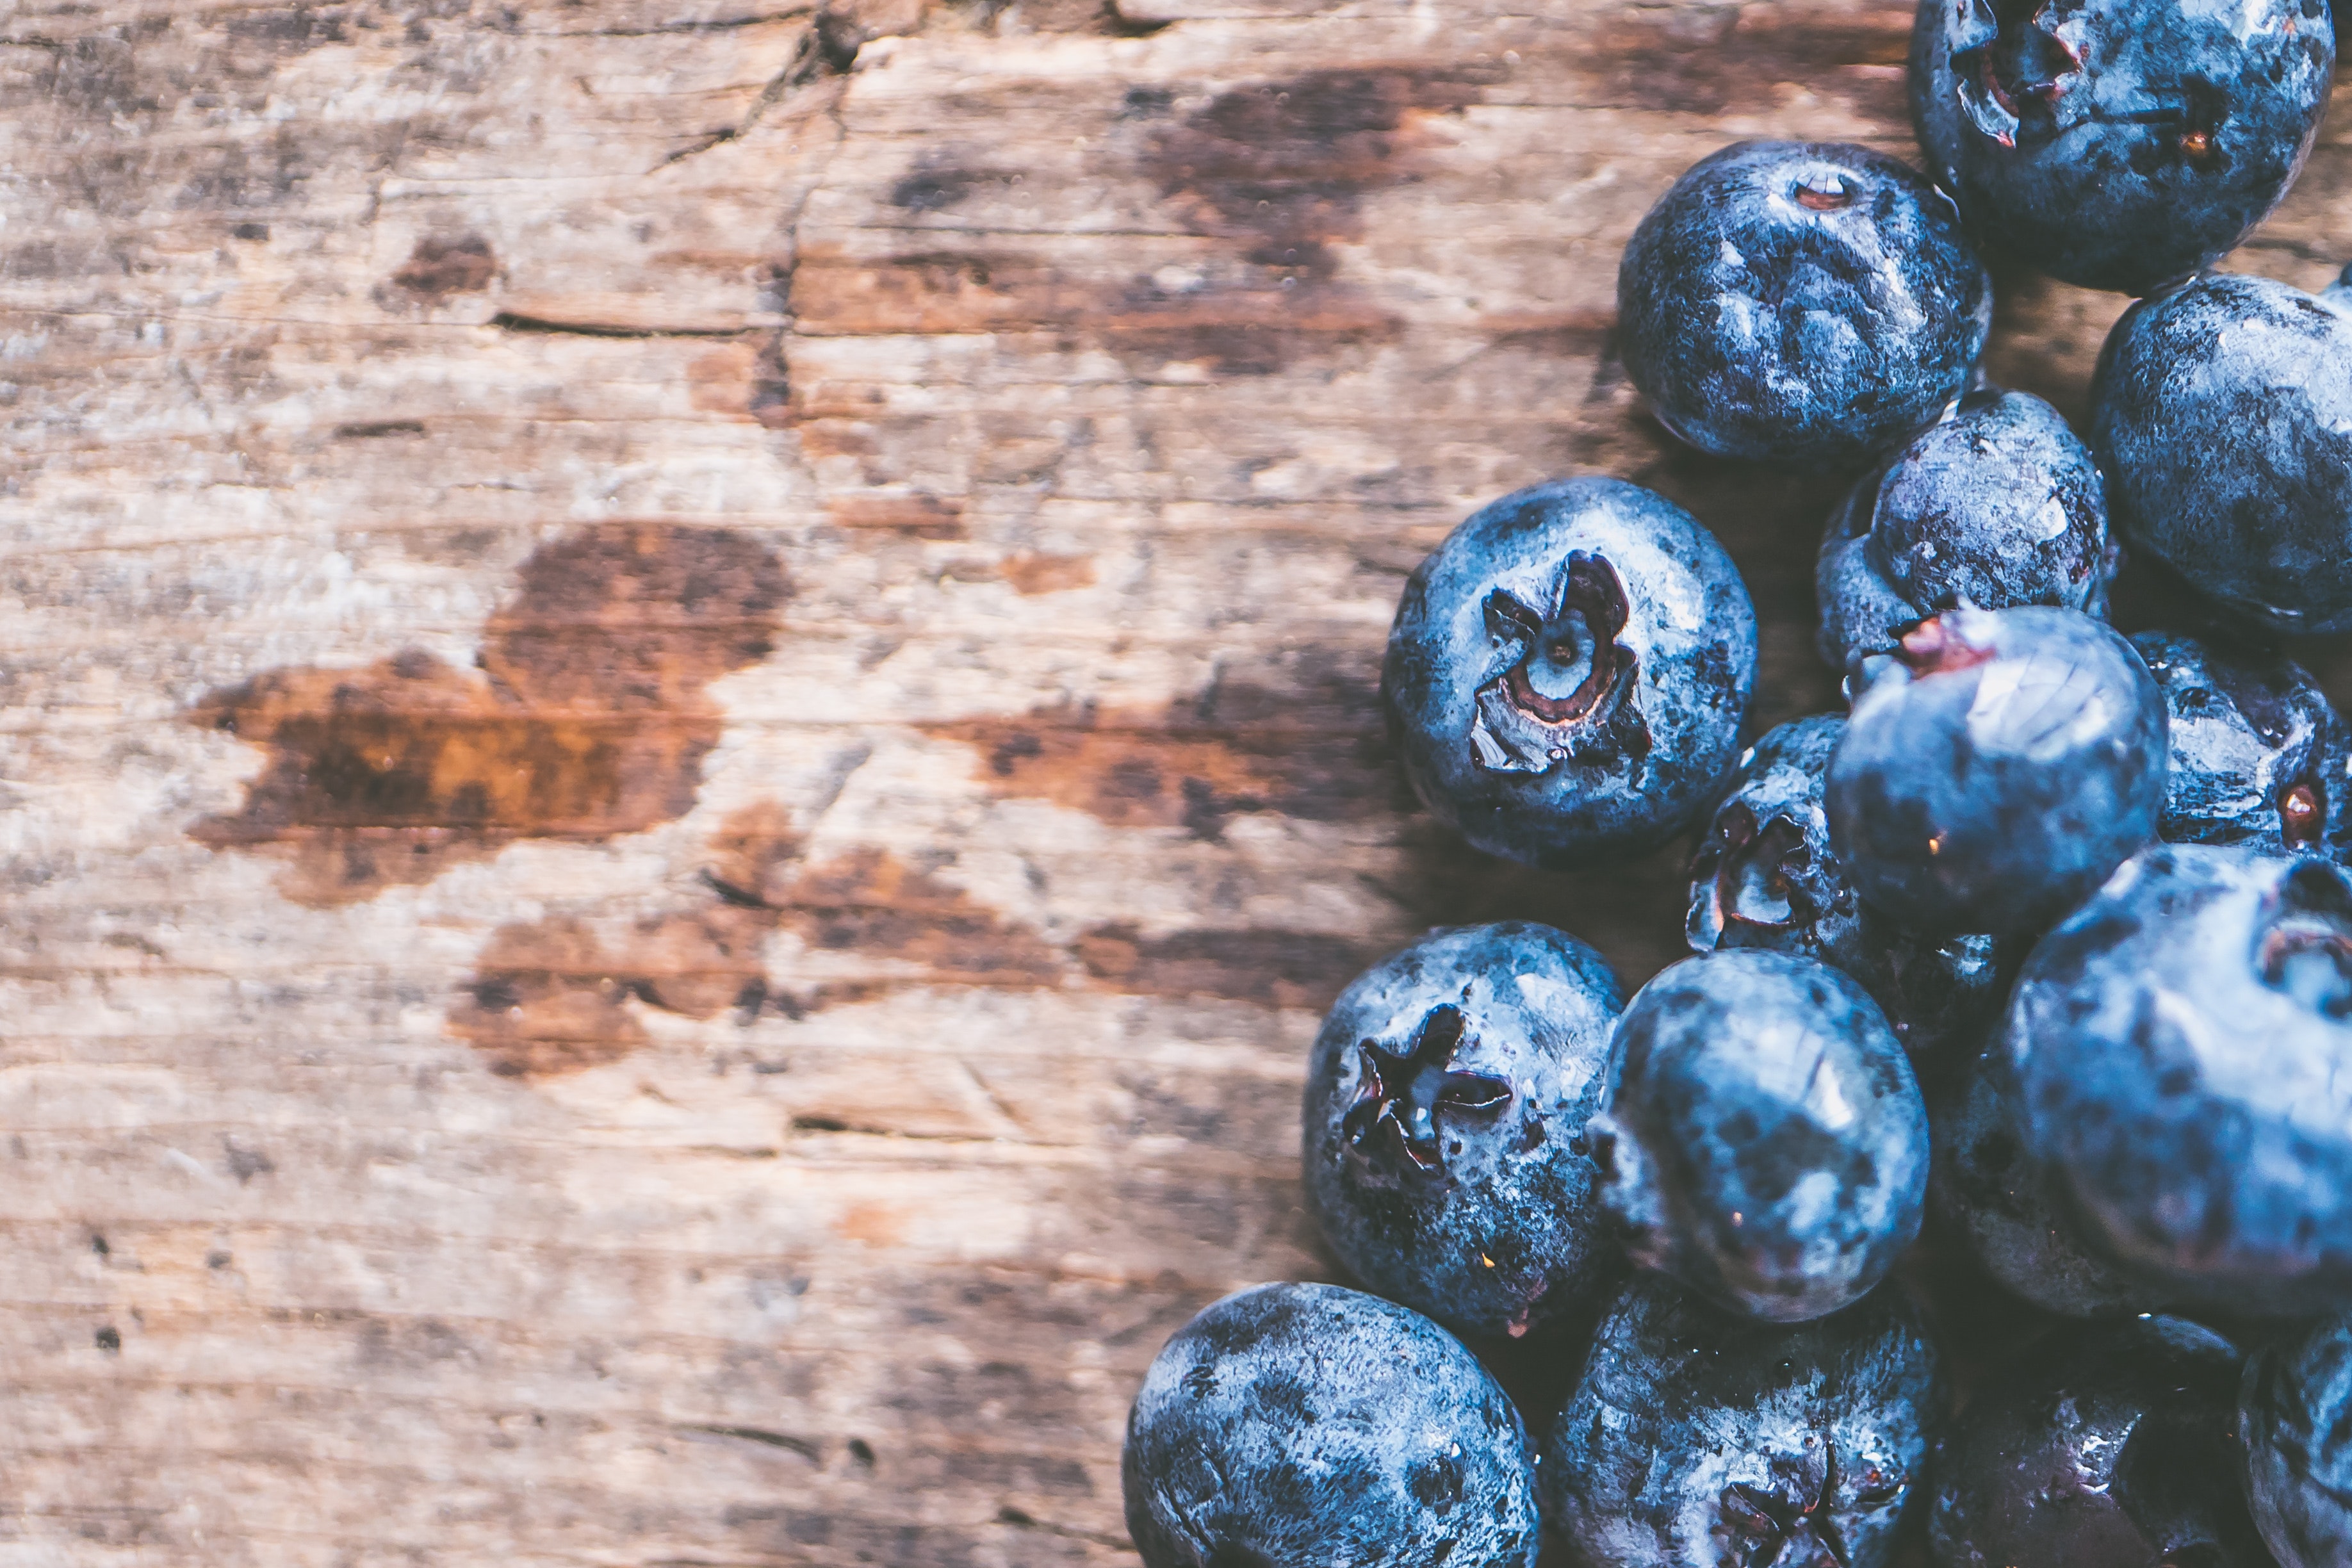 Close-Up Photography of Blueberries, Berries, Pile, Wood, Texture, HQ Photo